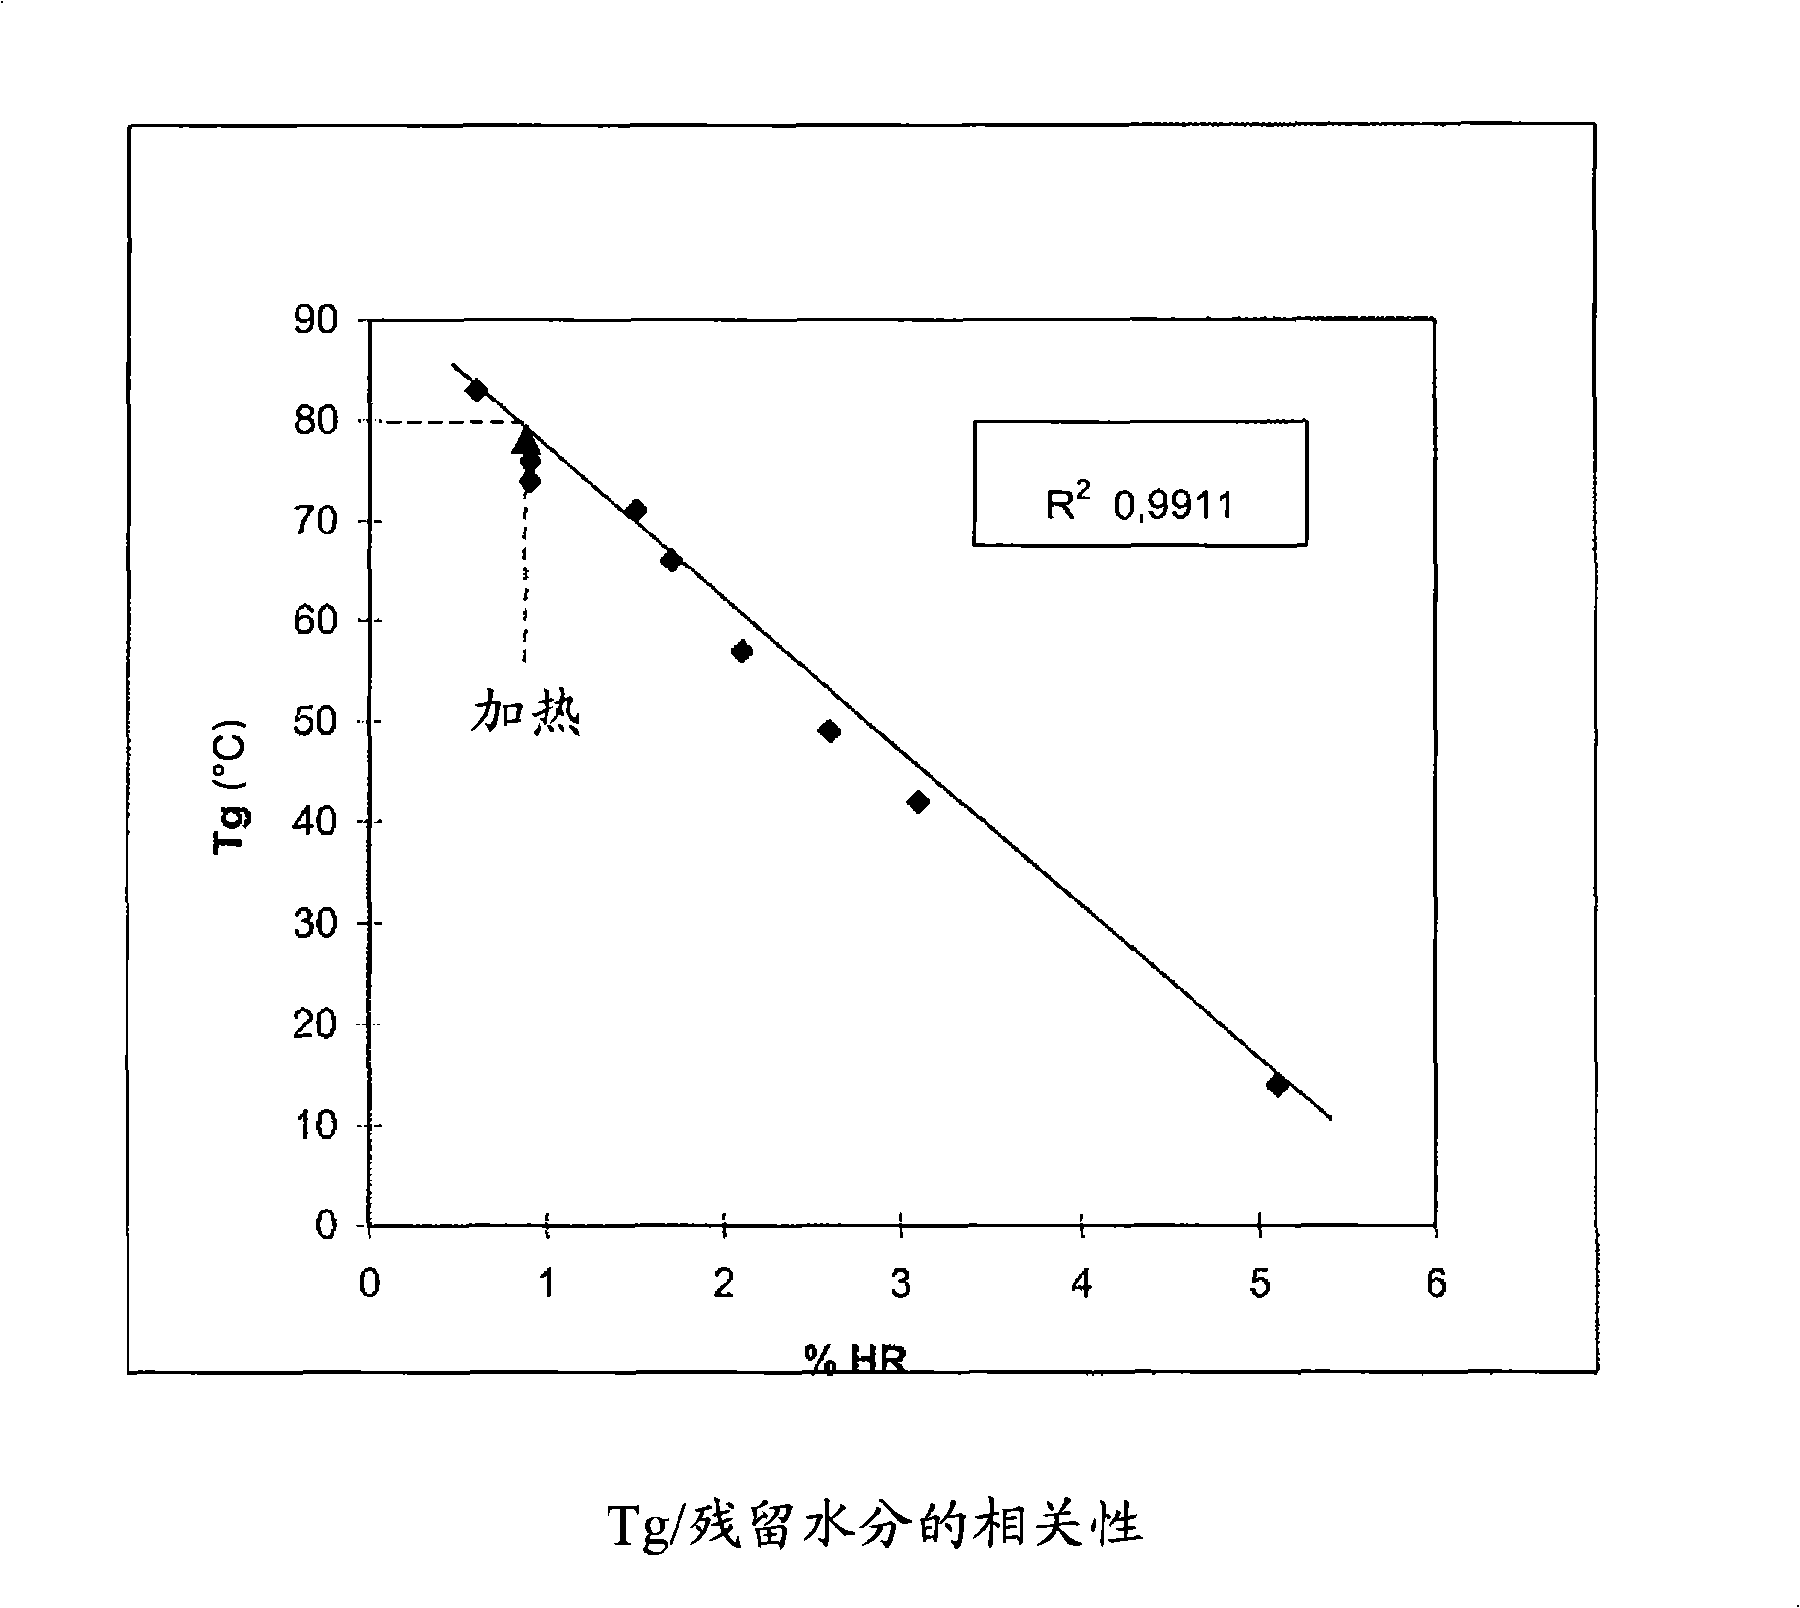 Method for viral inactivation by dry heating based on glass transition temperature